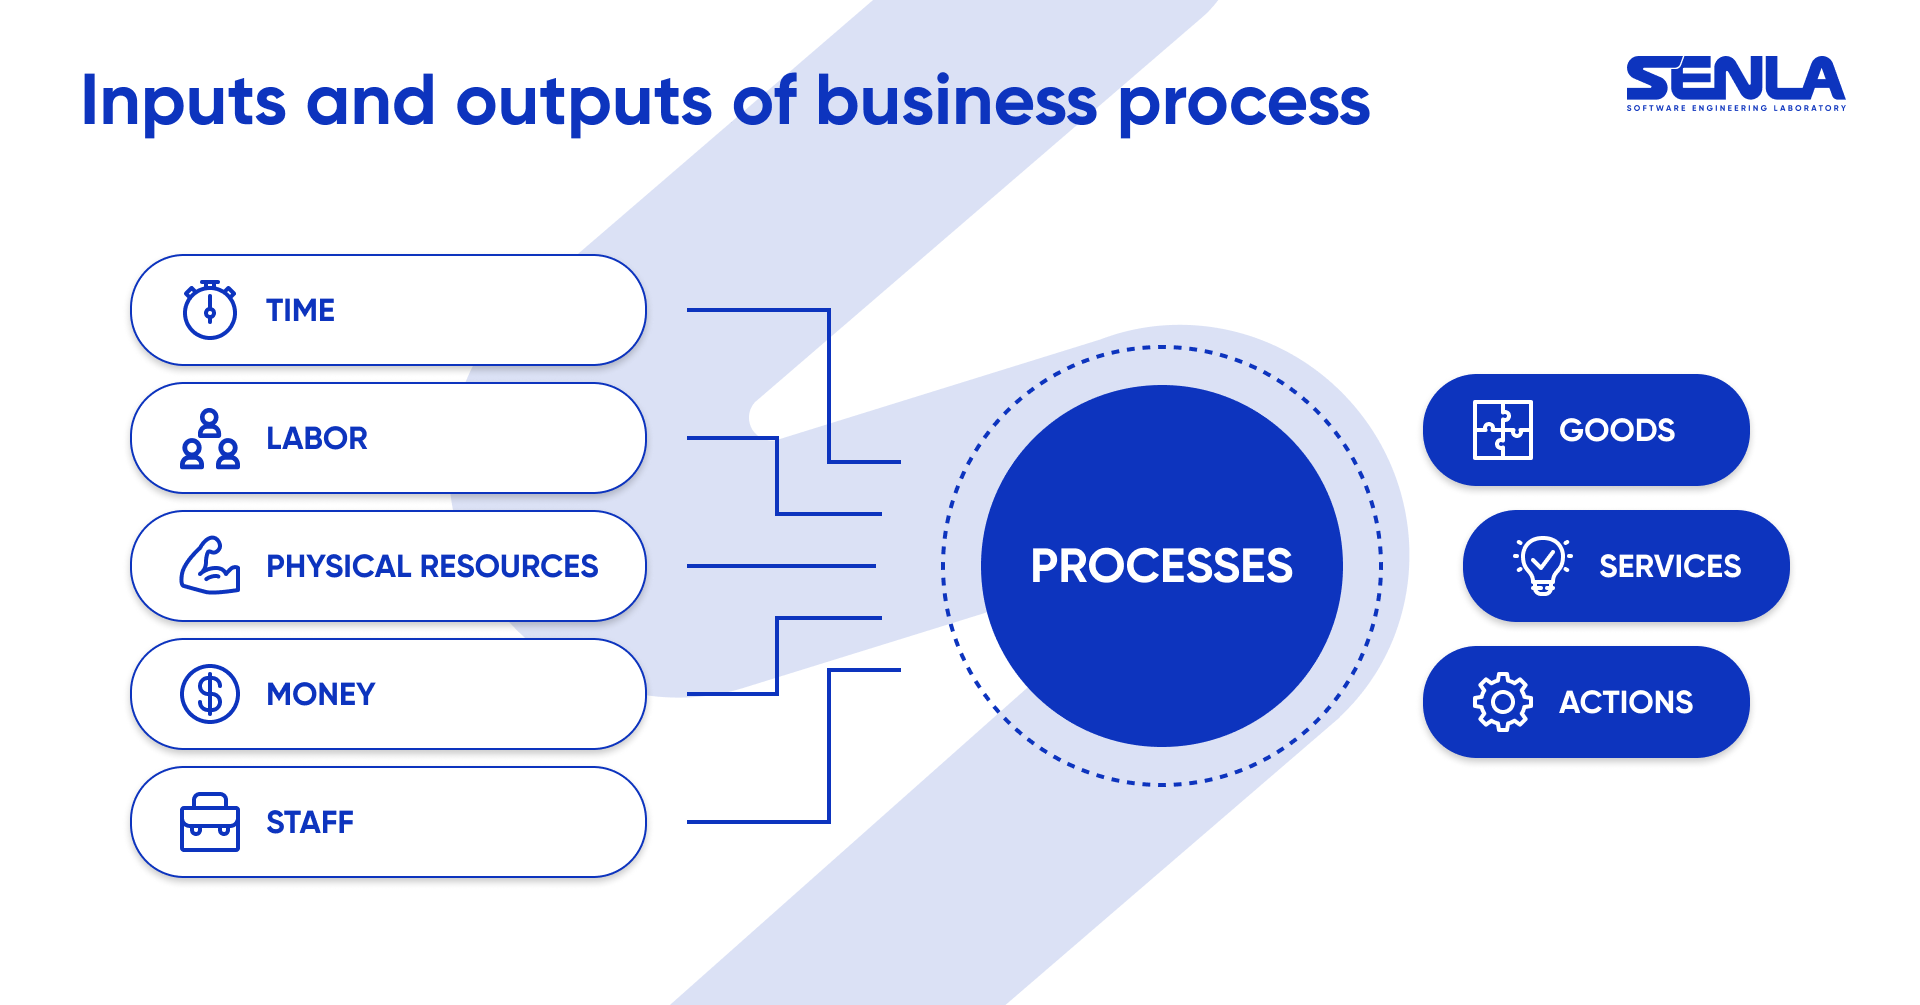 Inputs and outputs of a business process